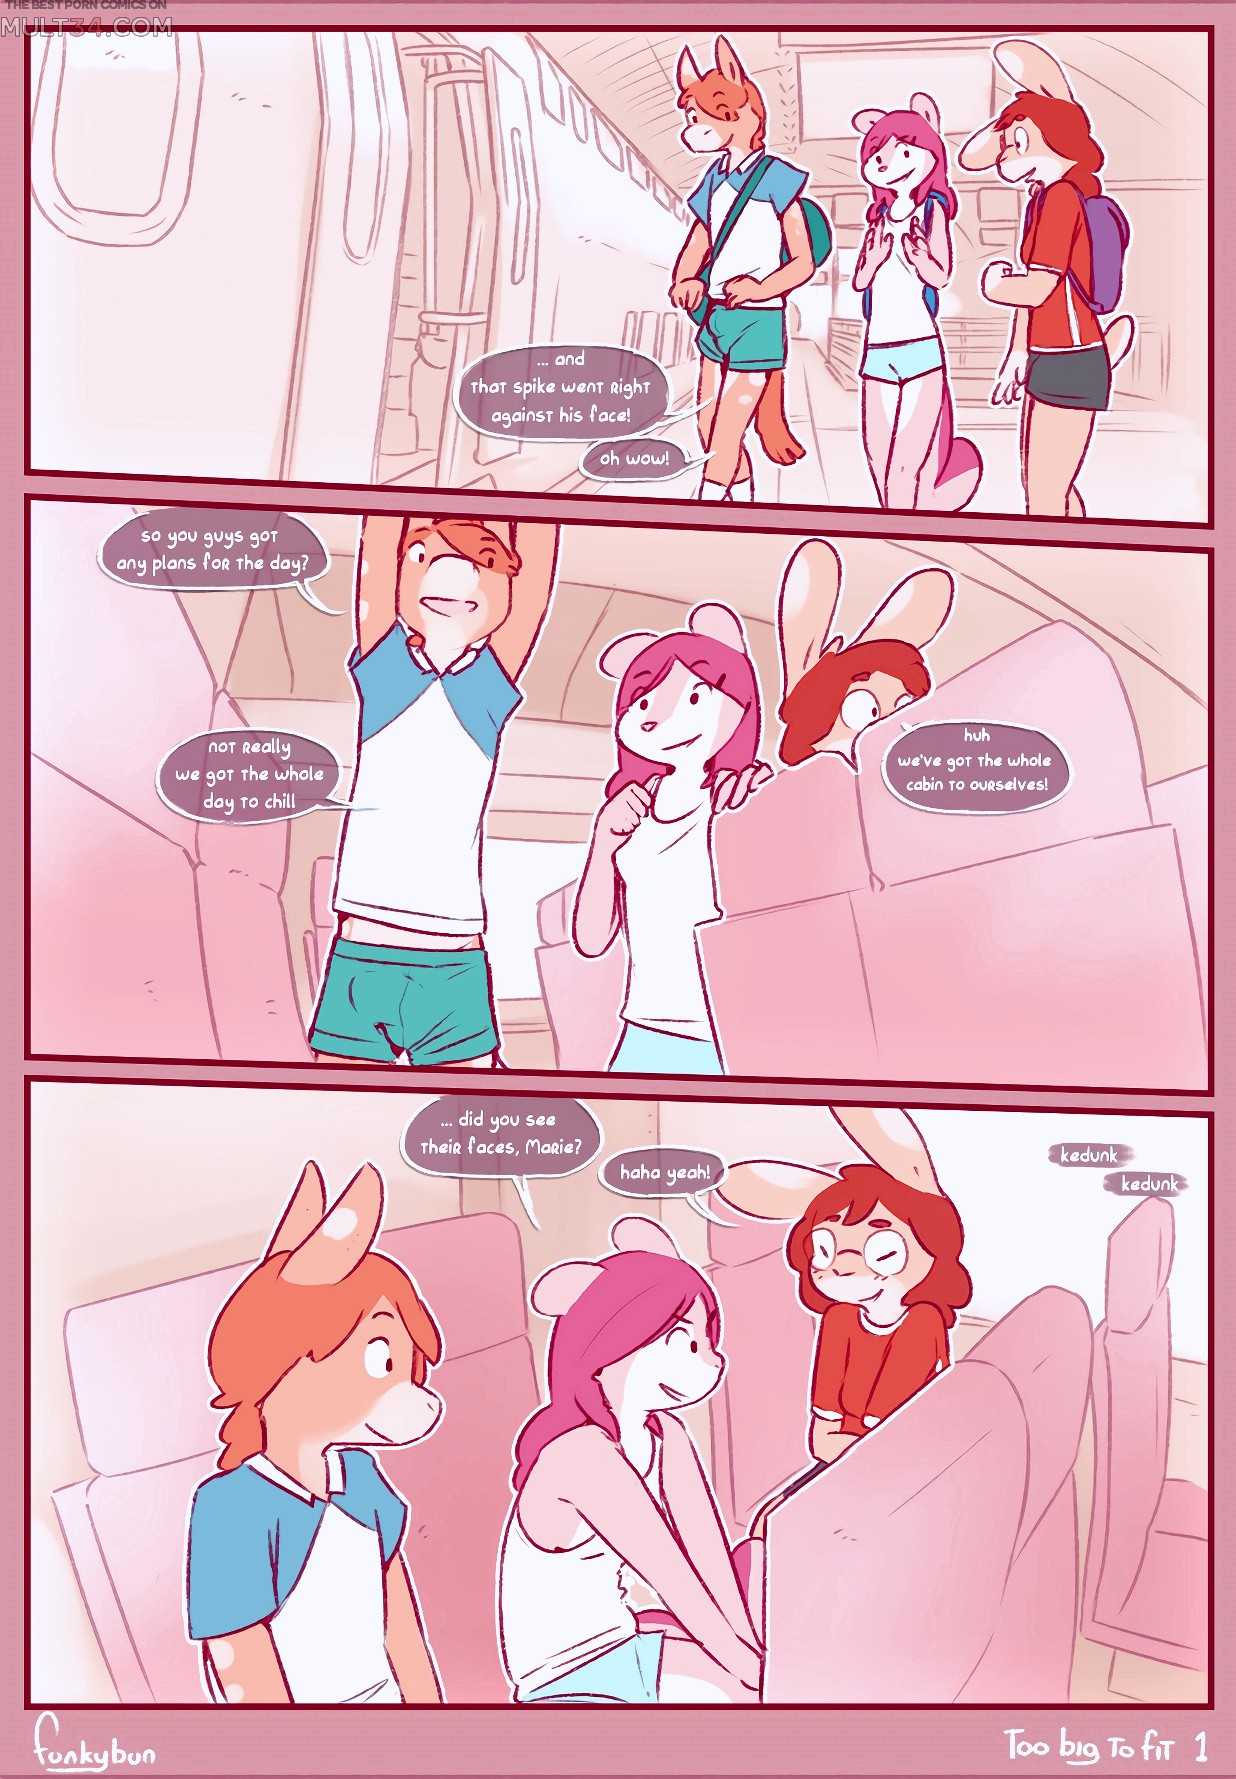 Too Big to Fit furry porn comic page 1